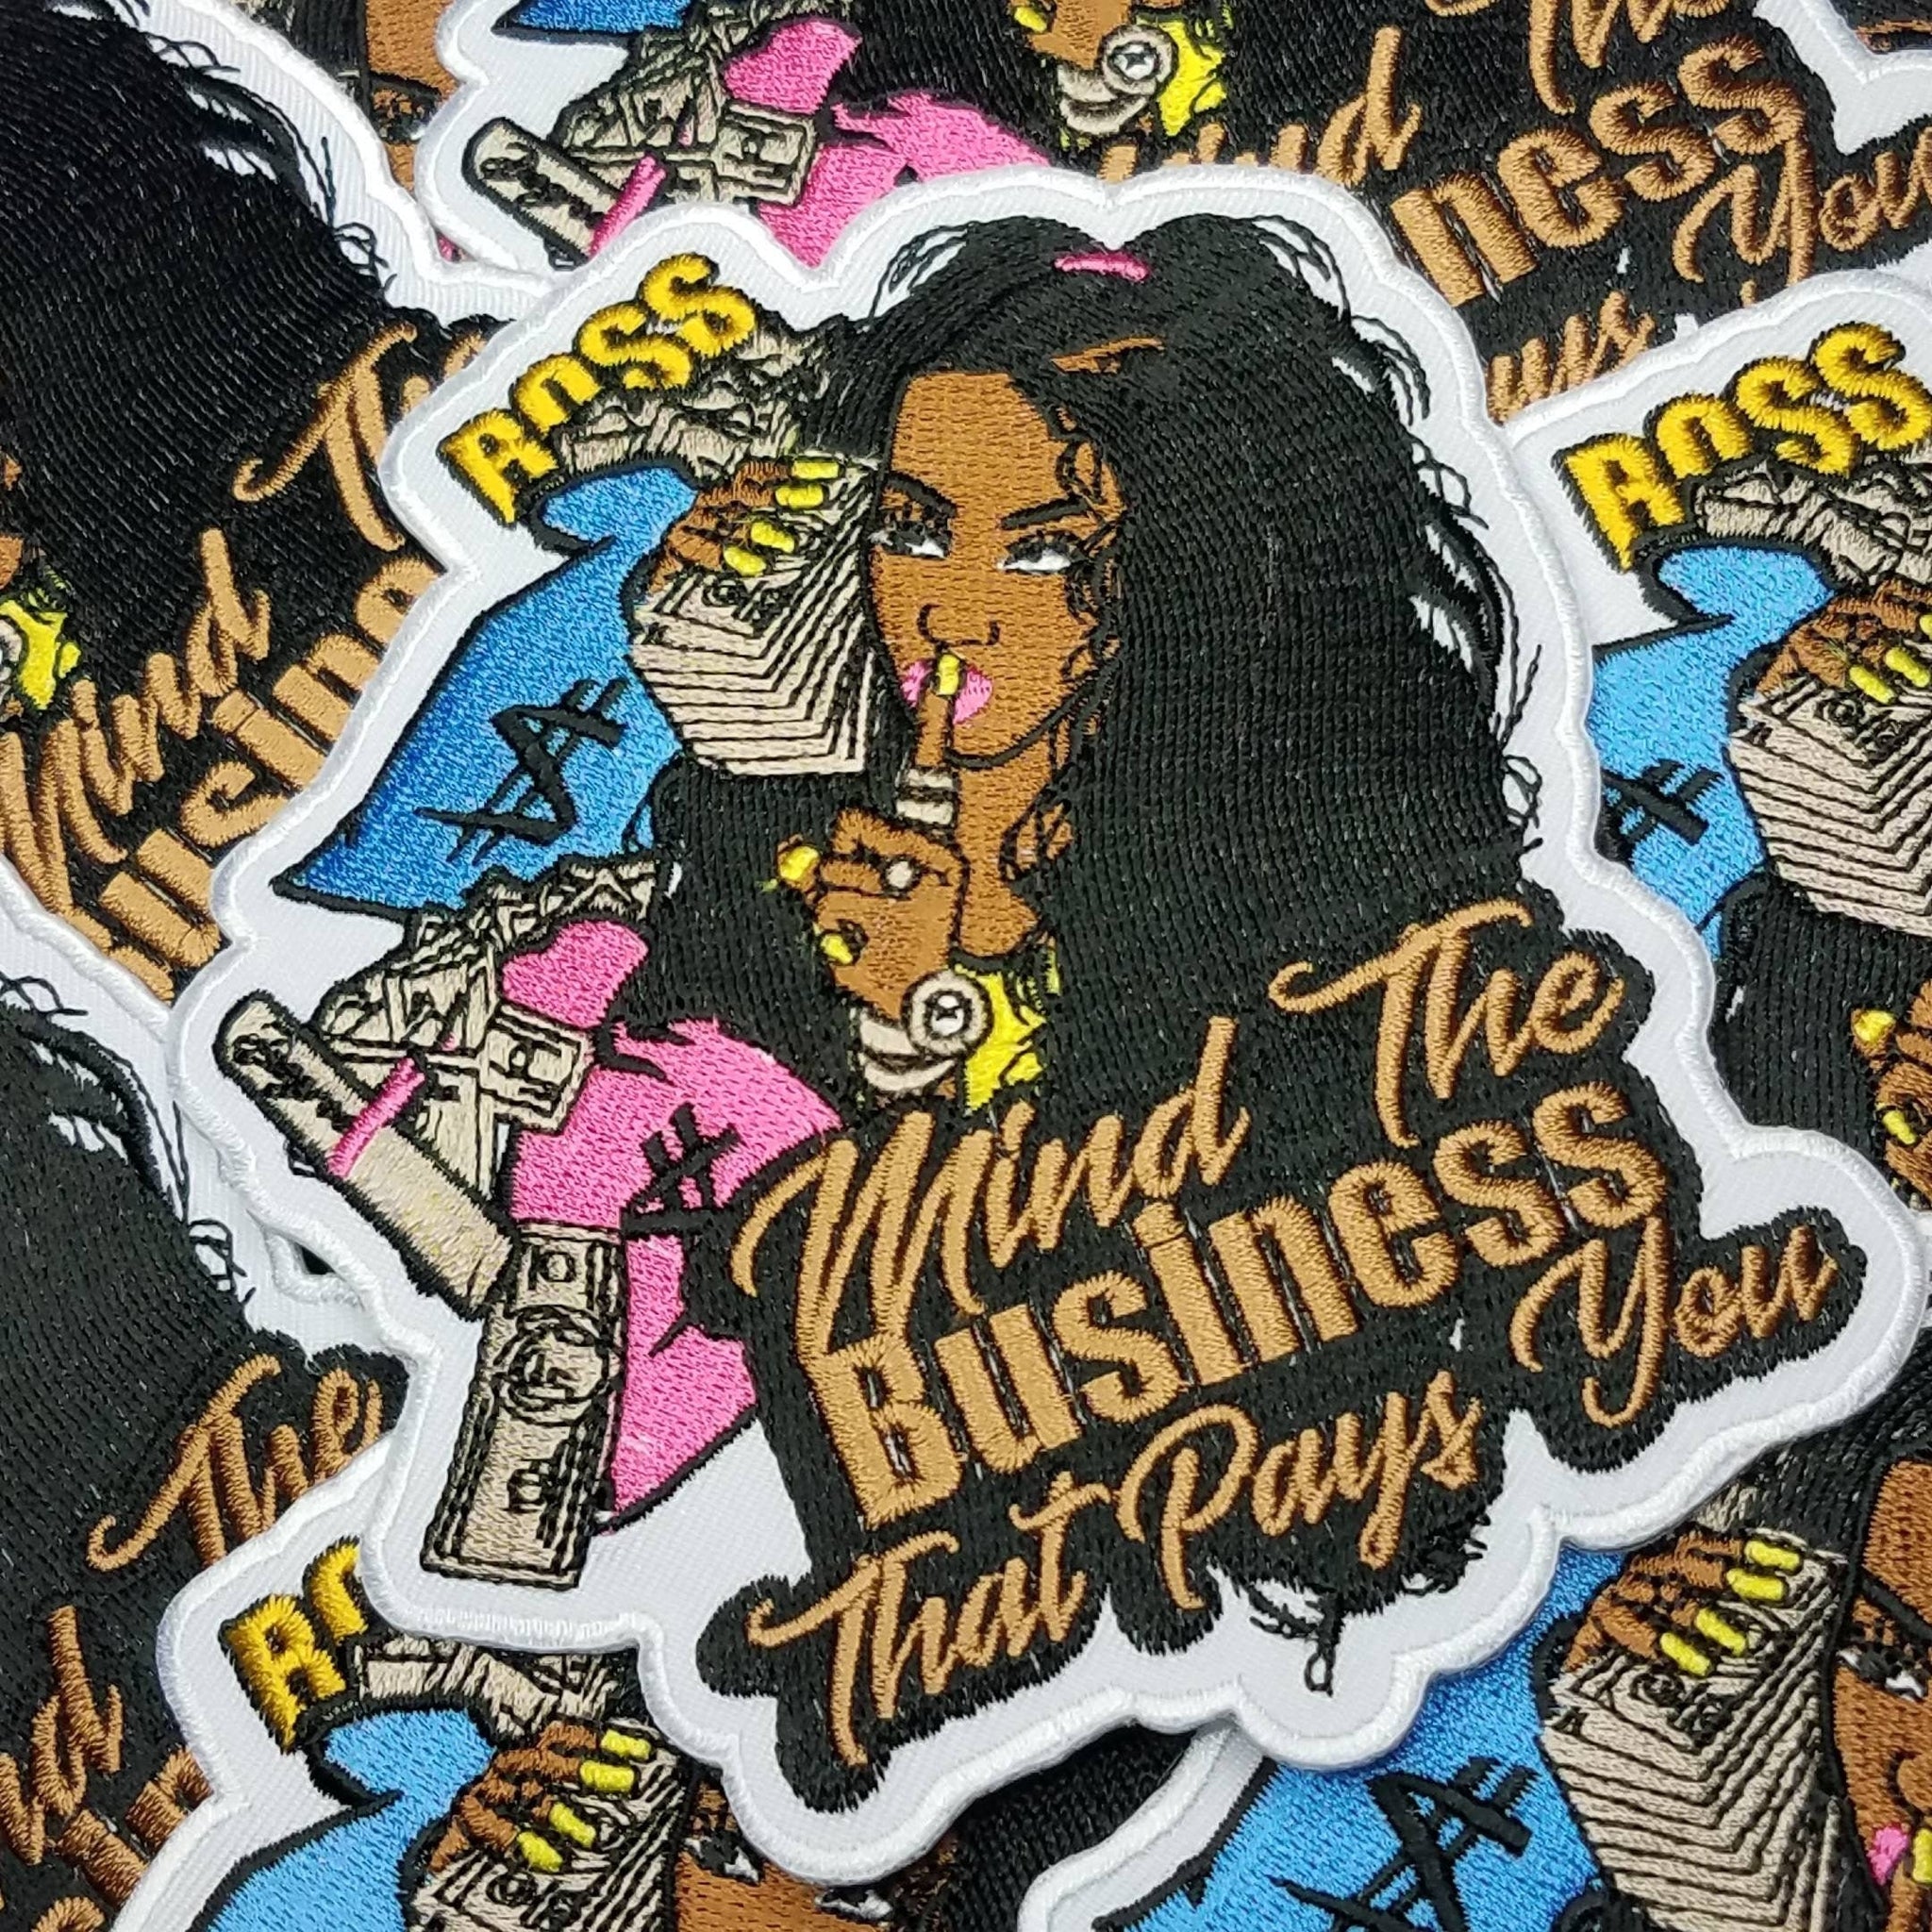 New SIZE, Mind the Business That Pays You, 4" Iron-on Patch,Applique for Clothing, Glam Girl, Girl Boss Patch for Hats, Crocs, and Jackets